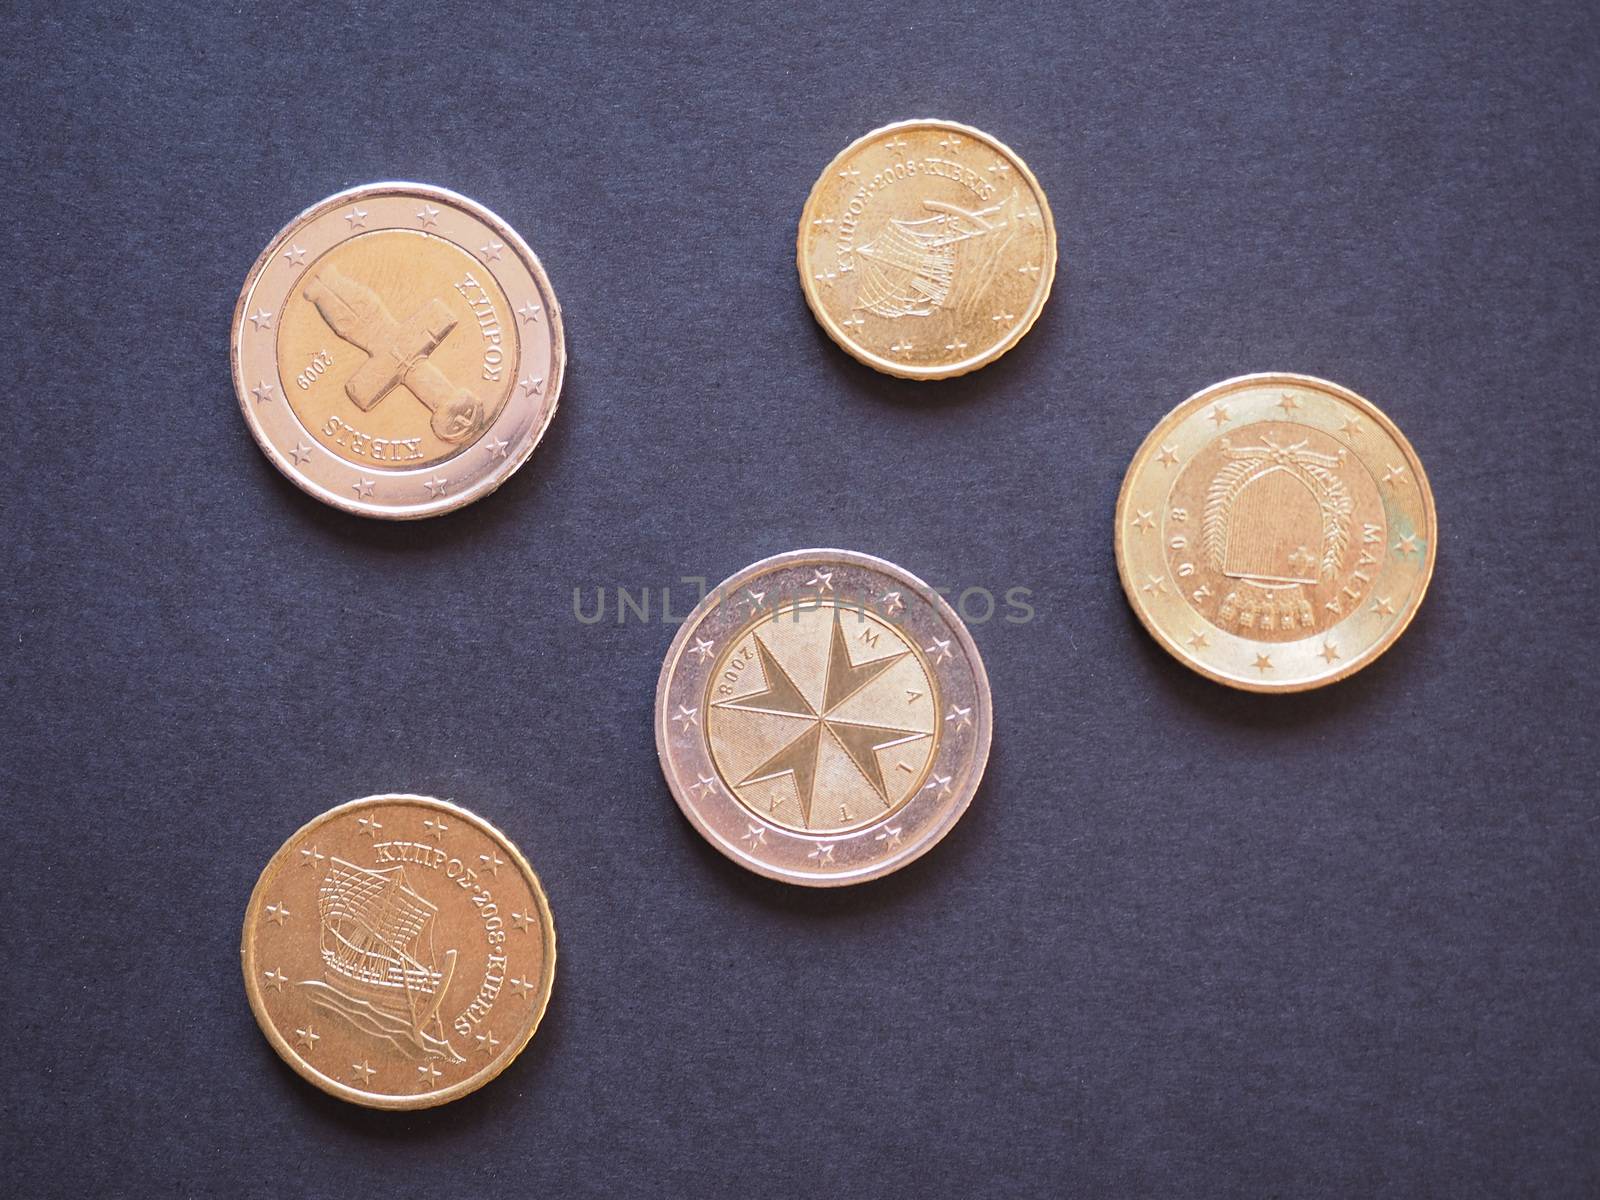 Euro coins EUR from Malta and Cyprus - Legal tender of the EU